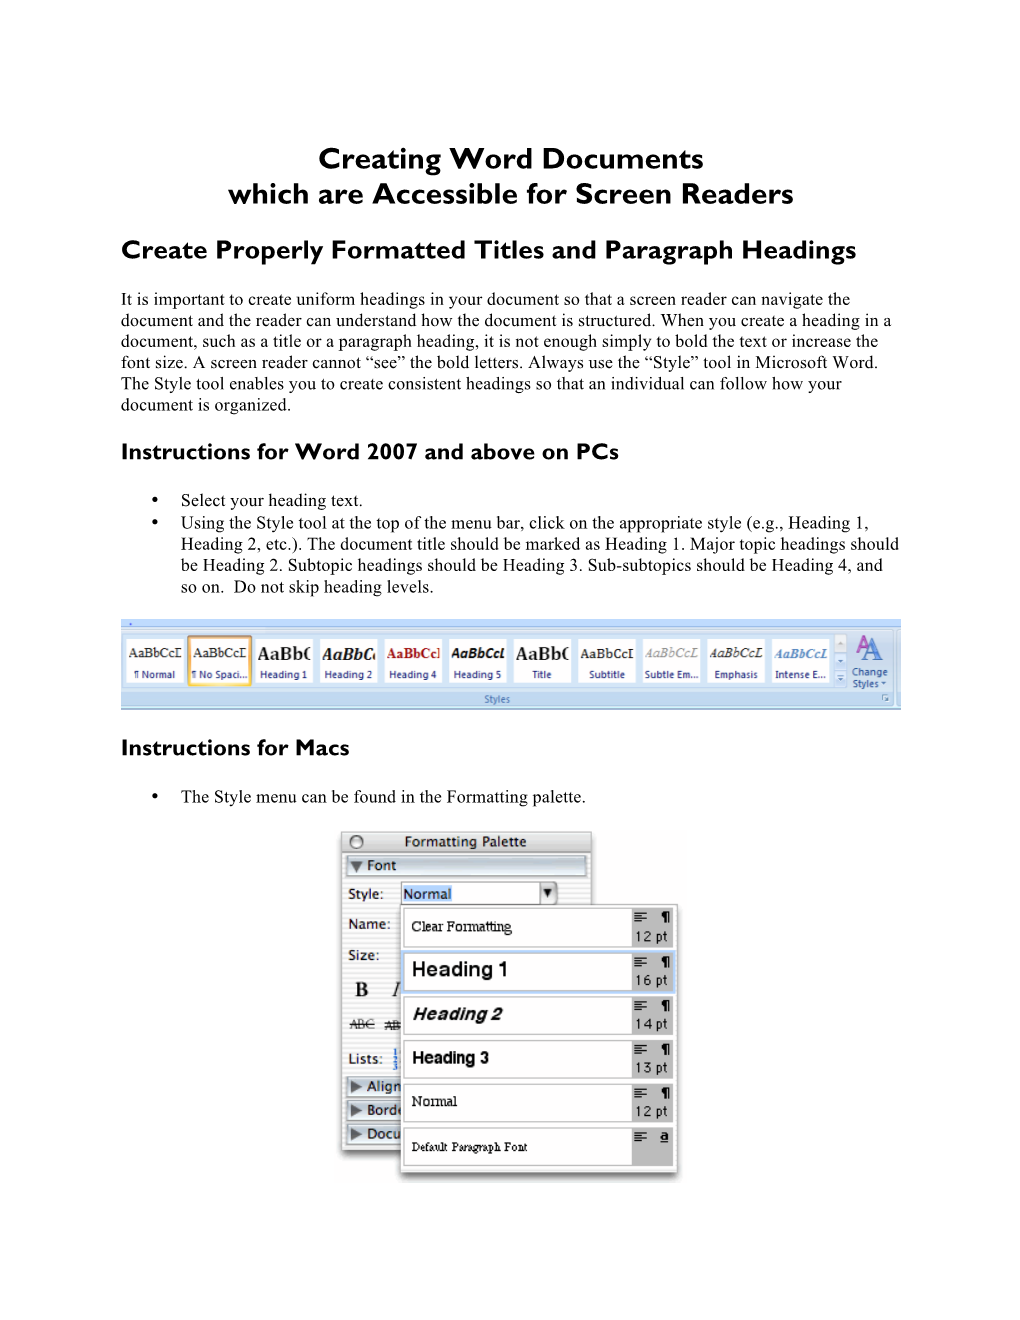 Creating Word Documents Which Are Accessible for Screen Readers